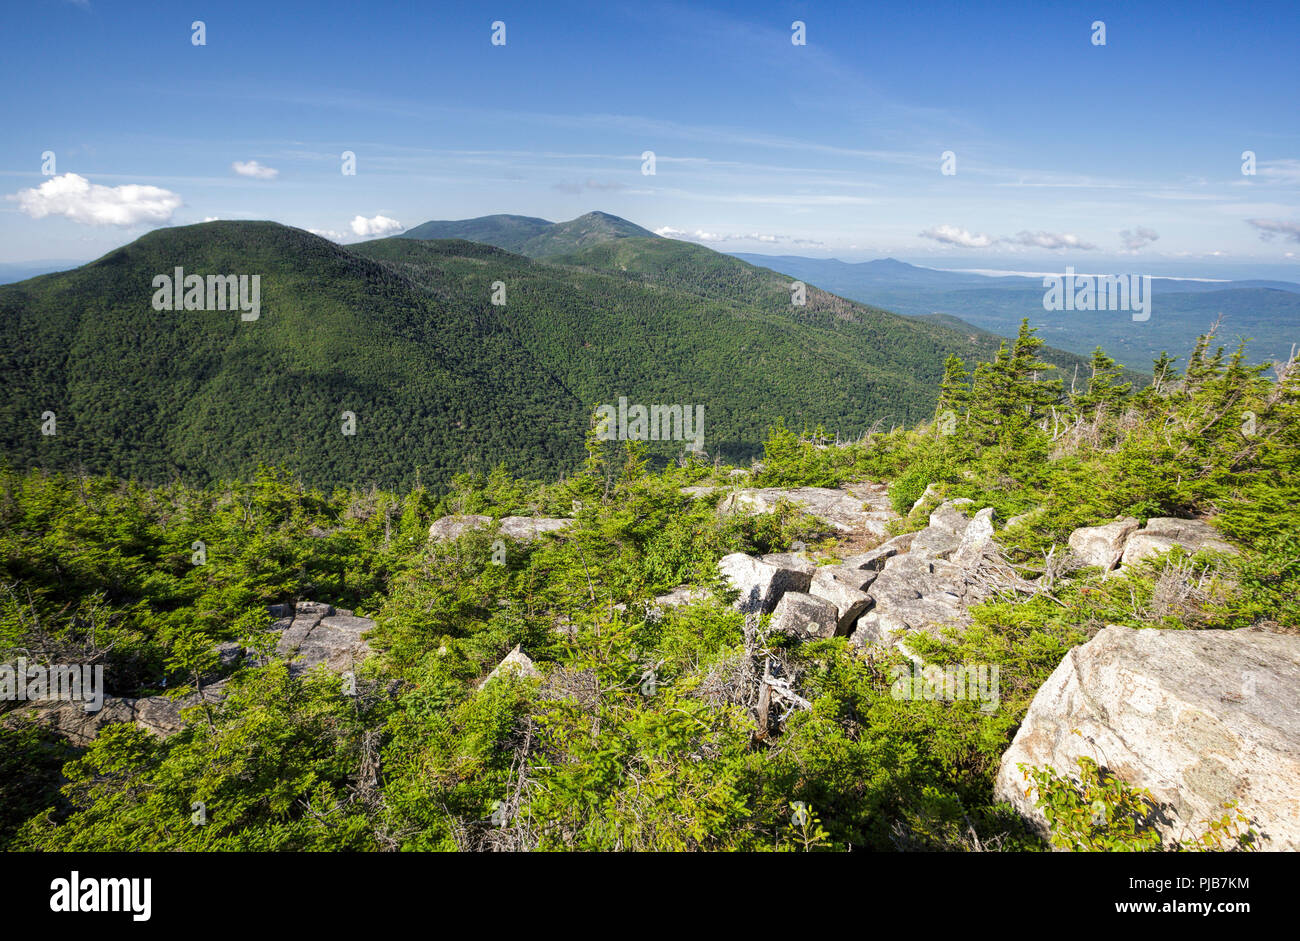 View of mountain landscape from along the Mittersill-Cannon Trail on Mittersill Mountain in the New Hampshire White Mountains during the summer months Stock Photo